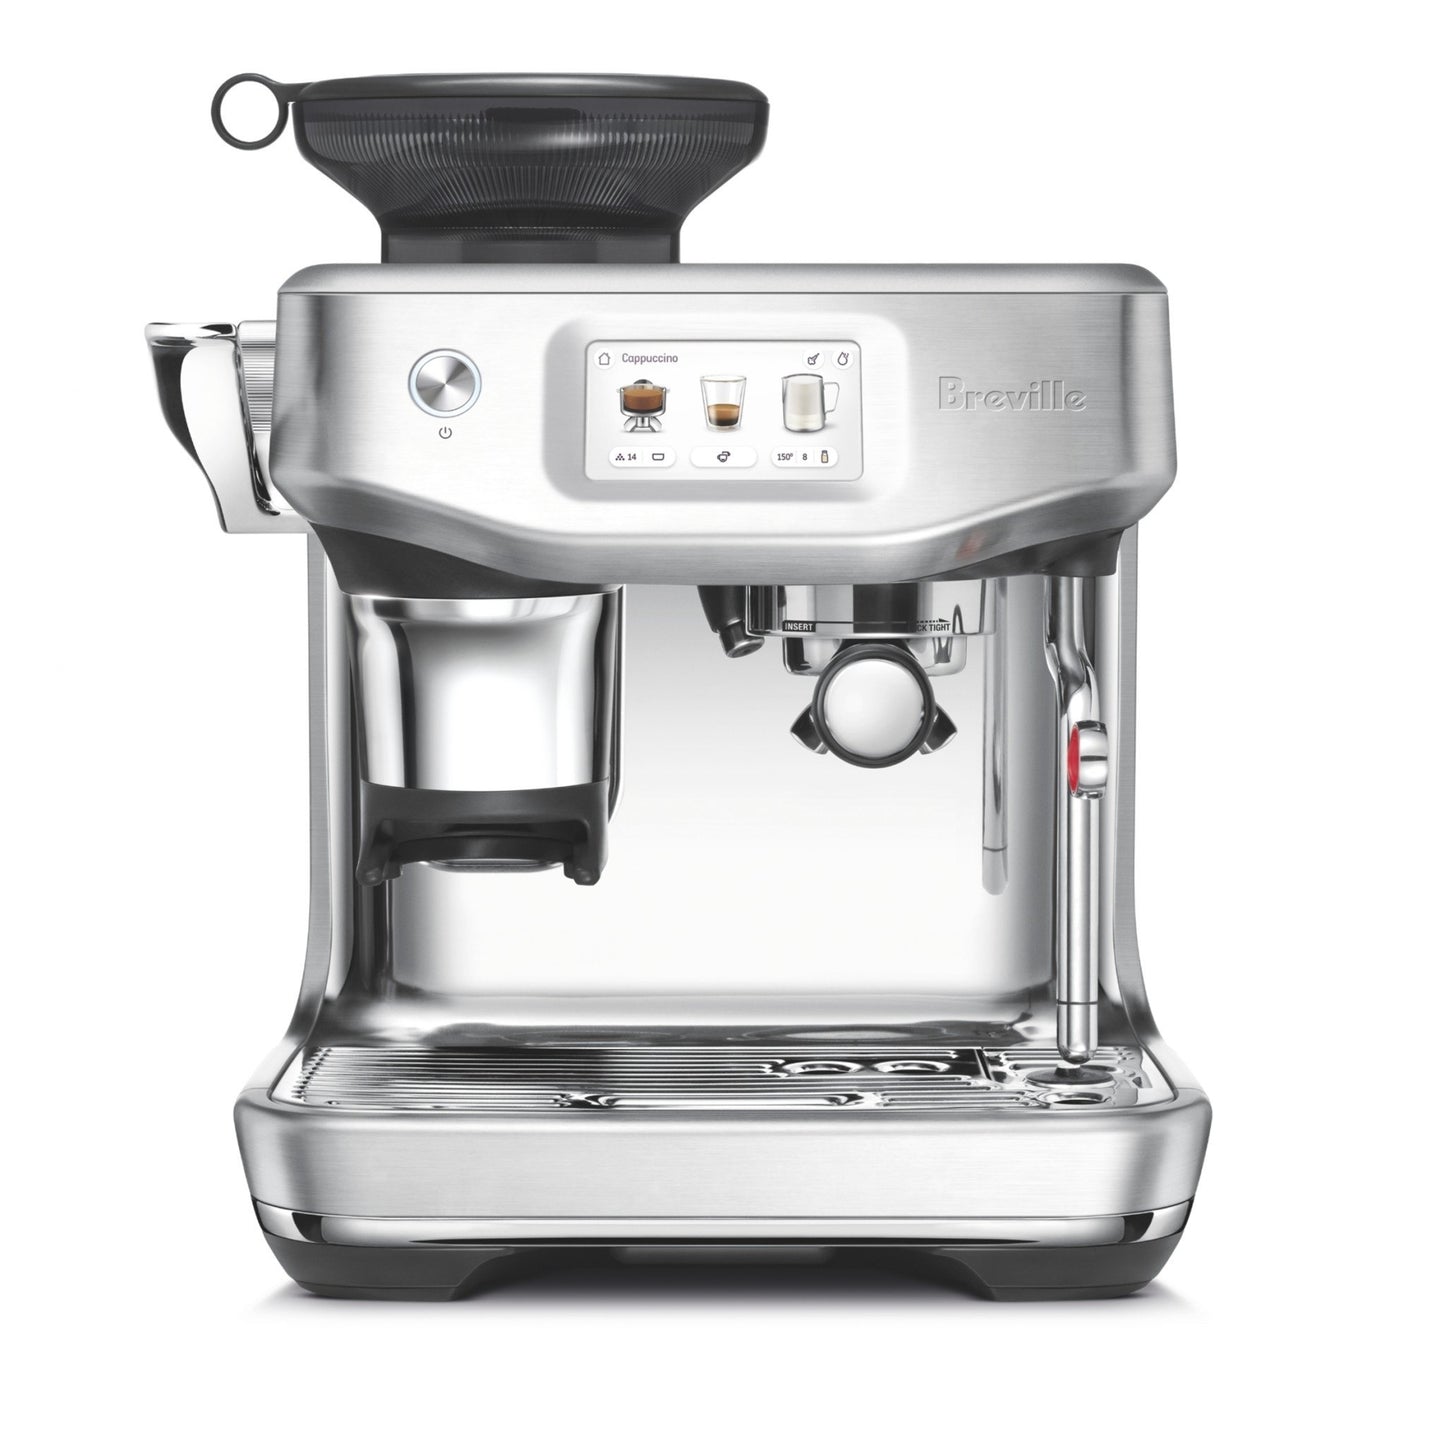 Breville Barista Touch Impress - Brushed Stainless